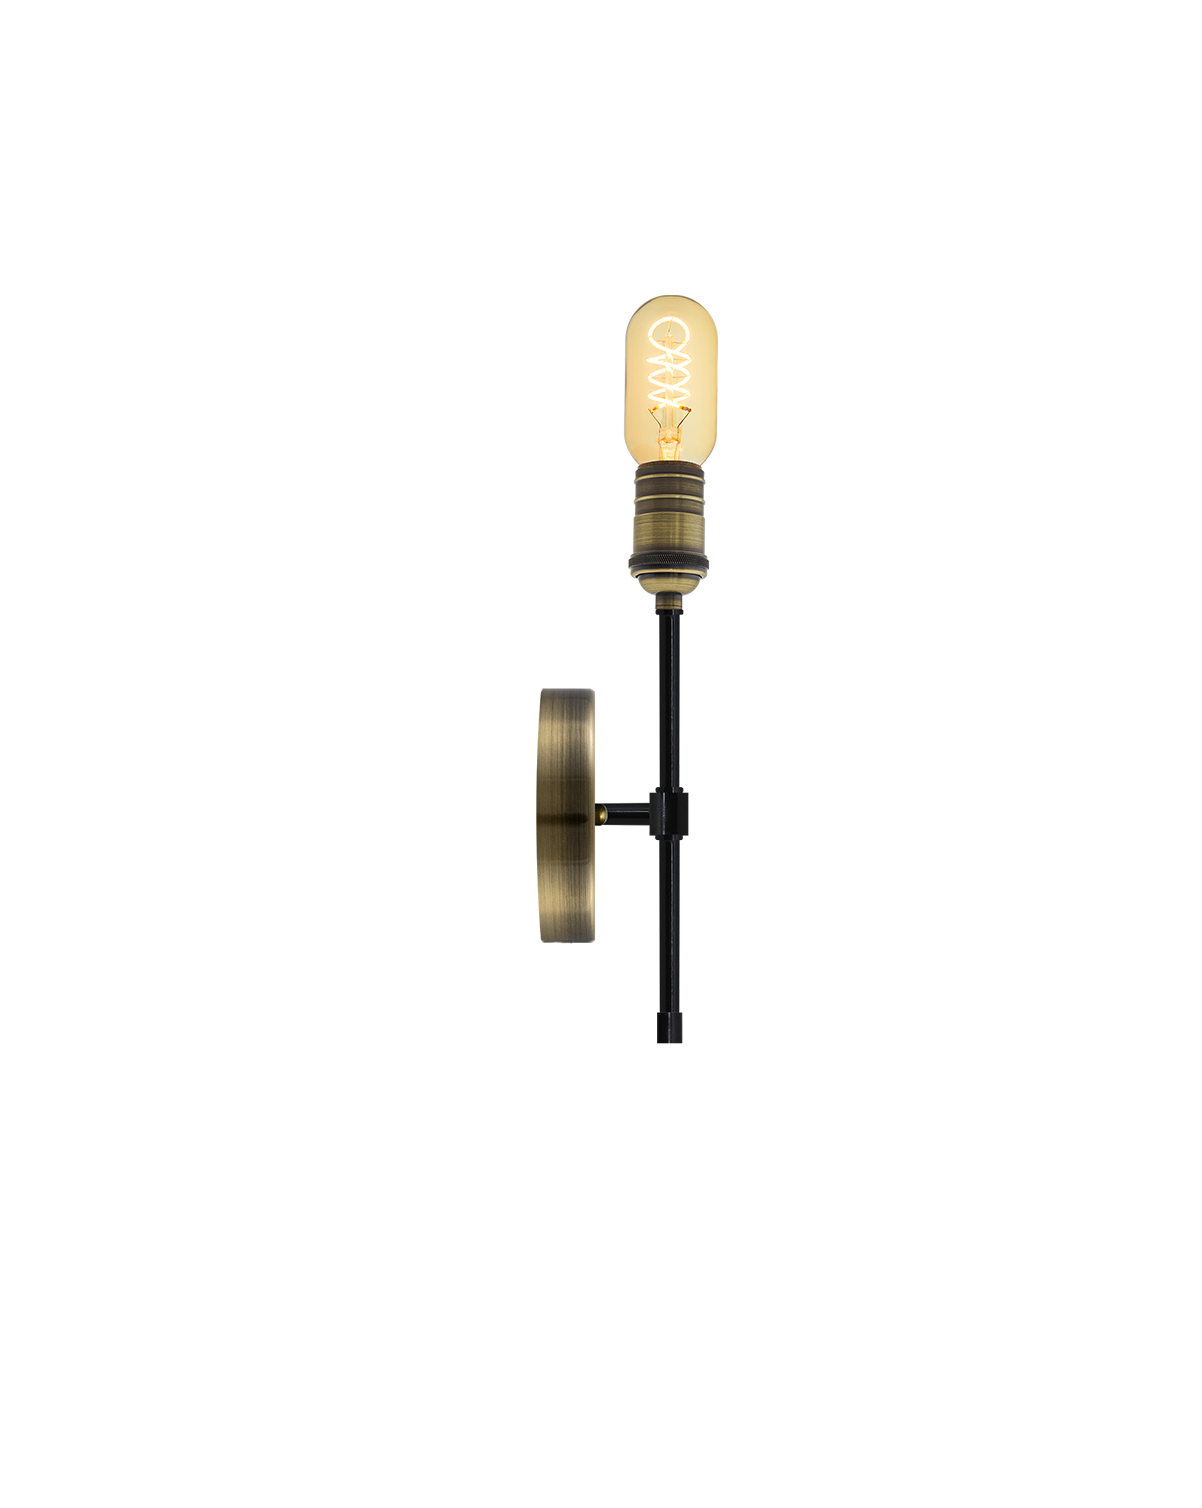 Torch Wall Sconce: Black and Antique Brass Hangout Lighting 